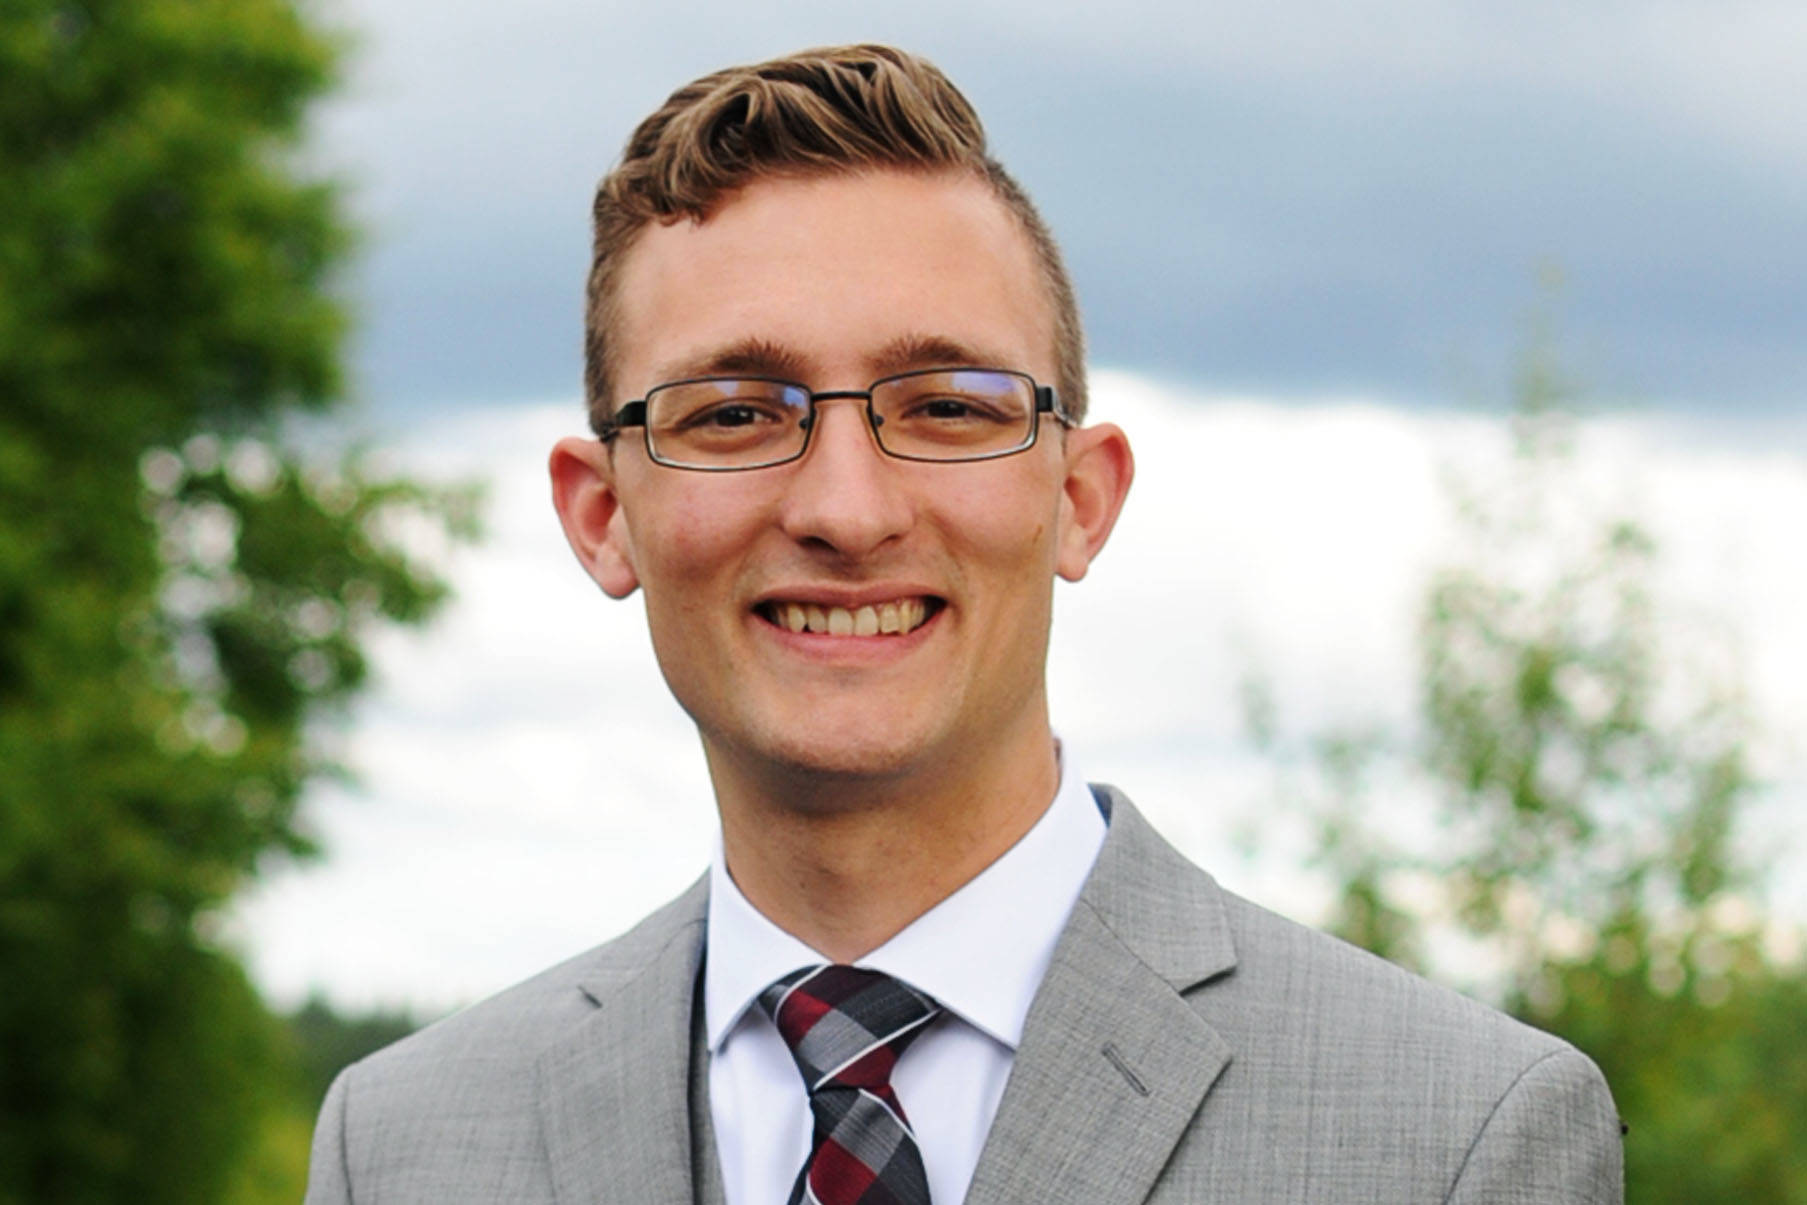 Seat C, Jordan Chilson, unopposed for Soldotna City Council